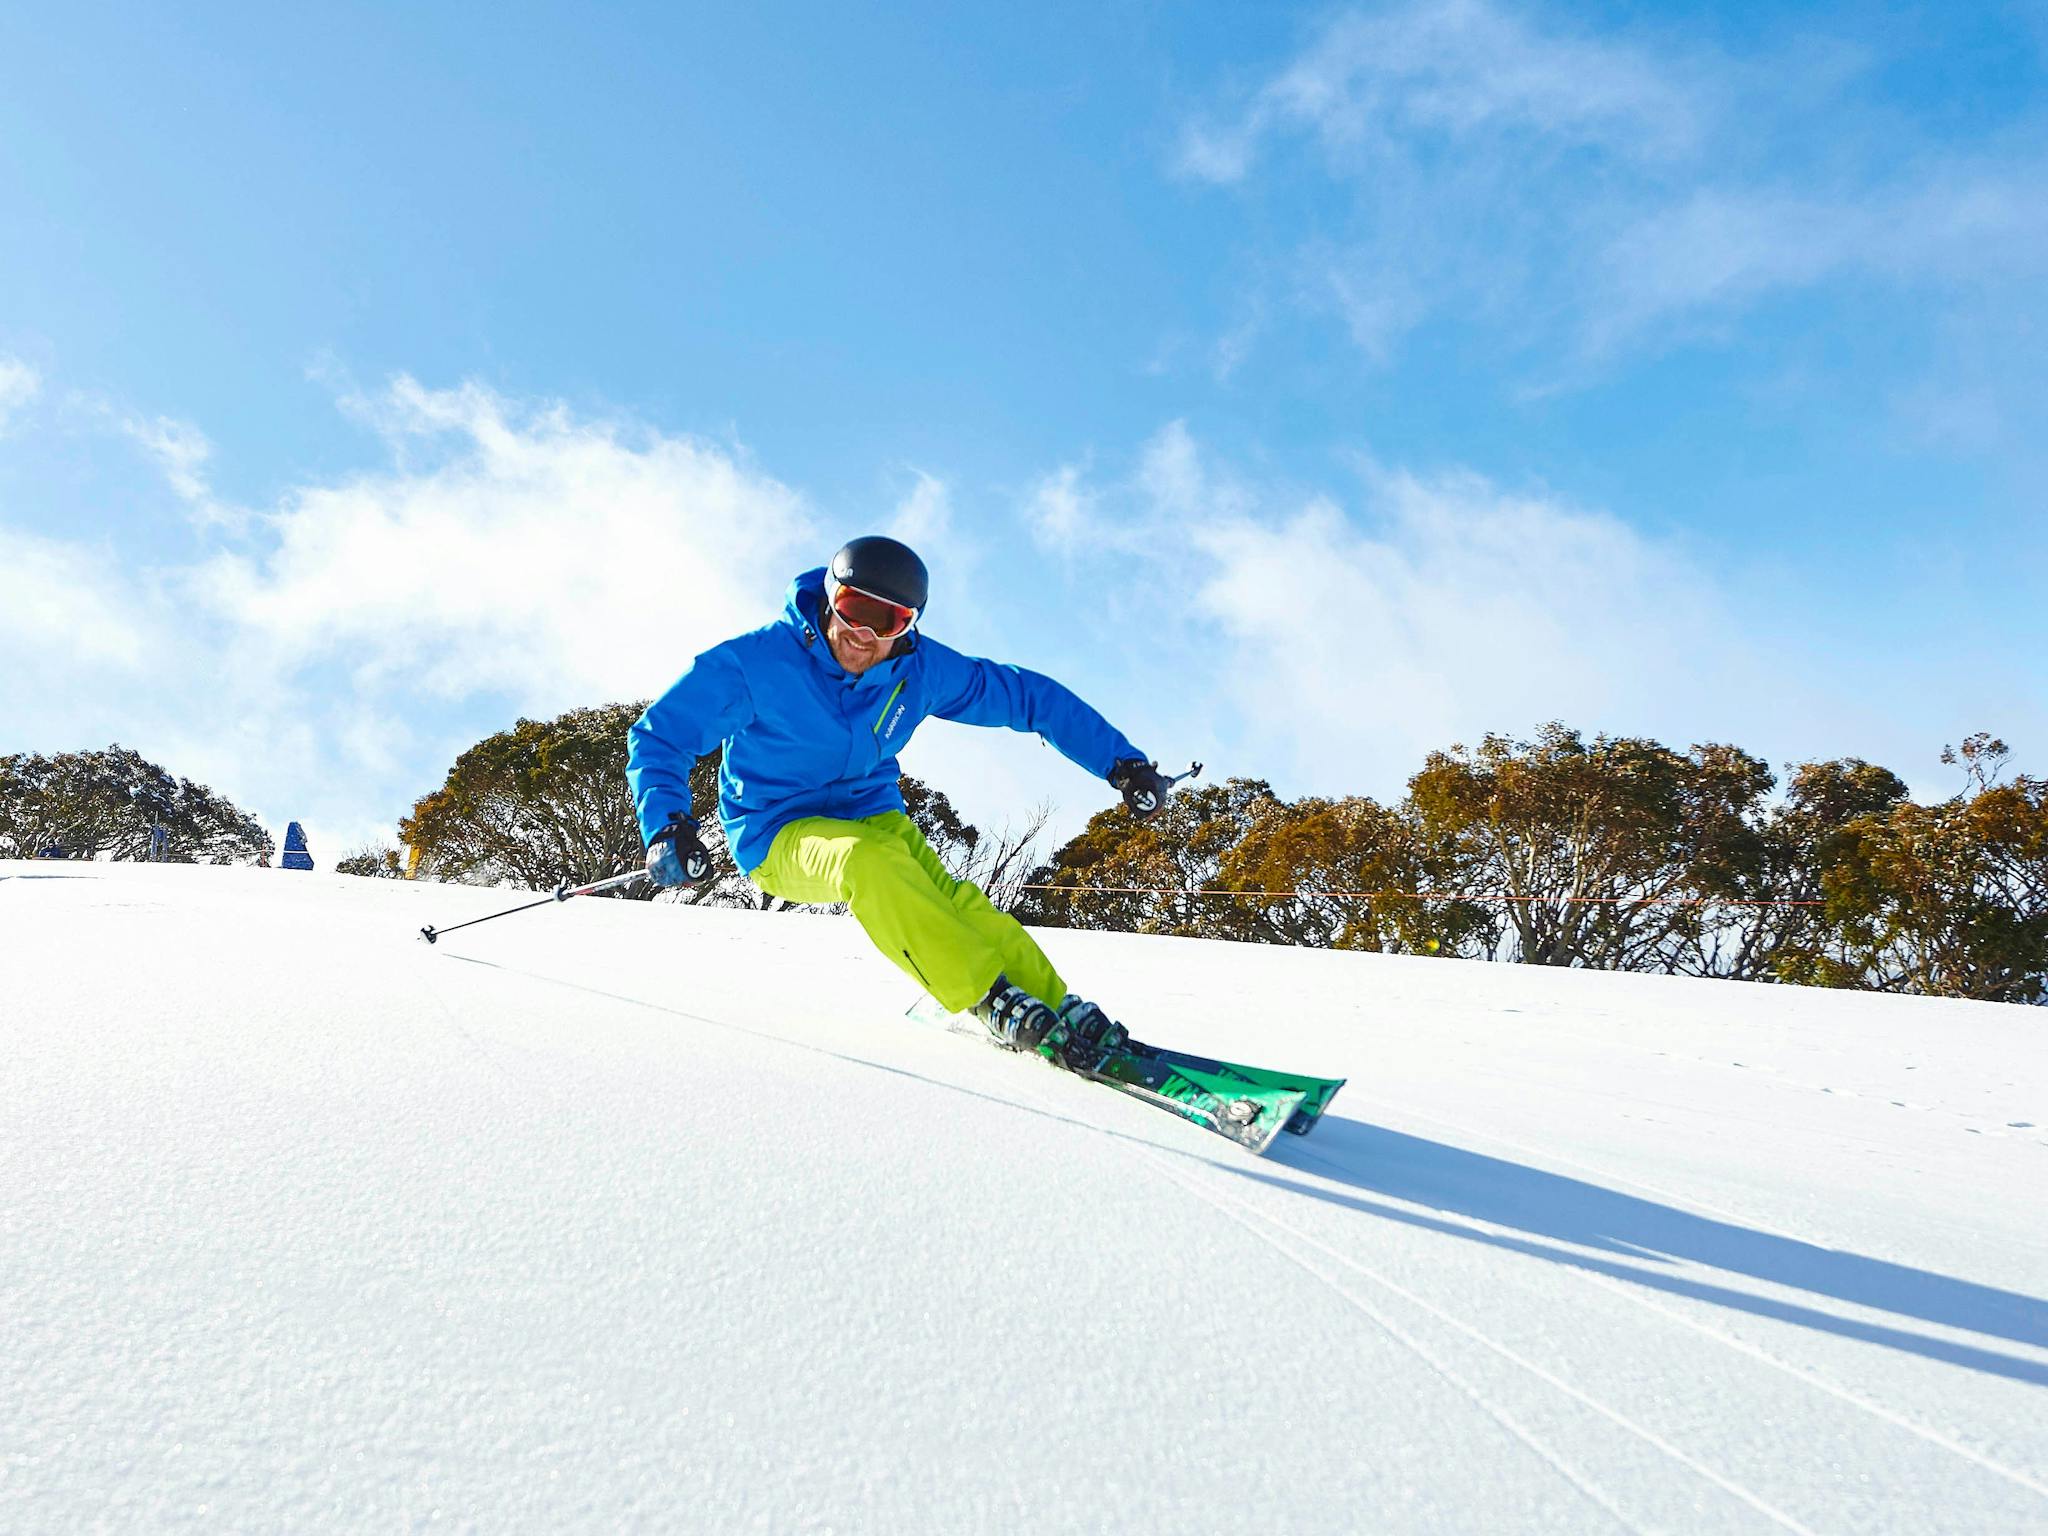 Blue bird days make for perfect skiing conditions